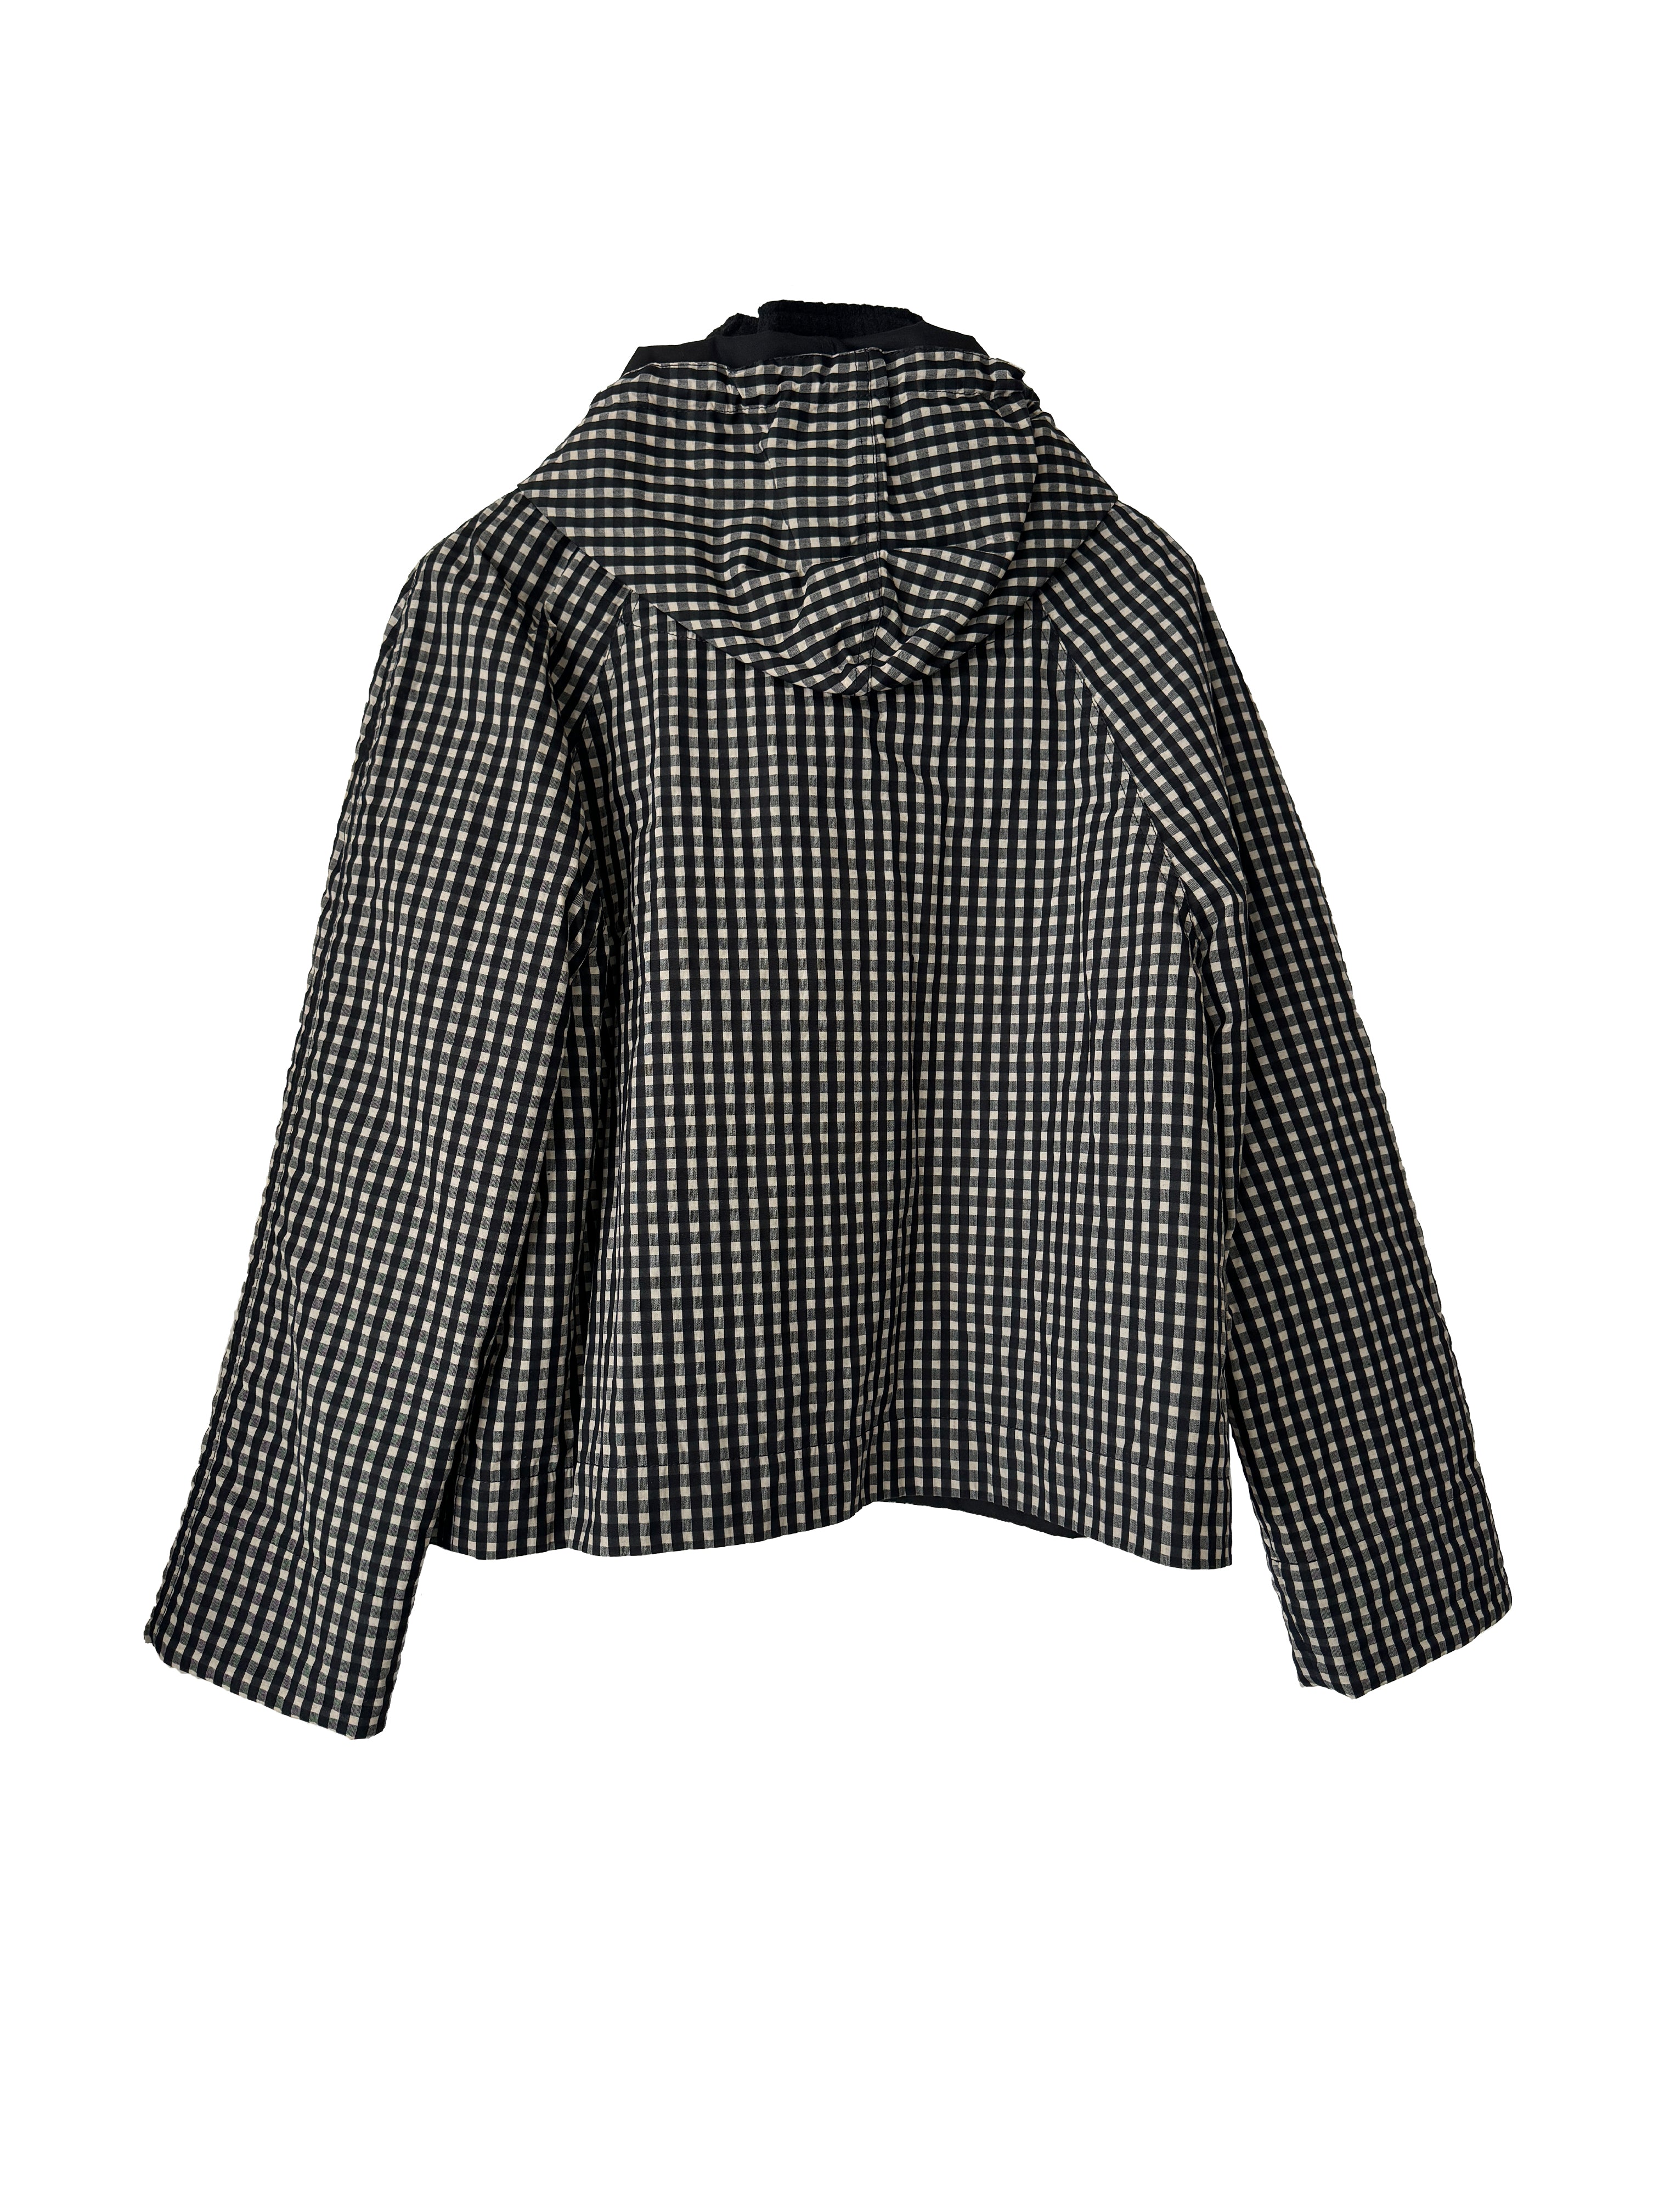 BARIA TWO IN ONE JACKET CHECK